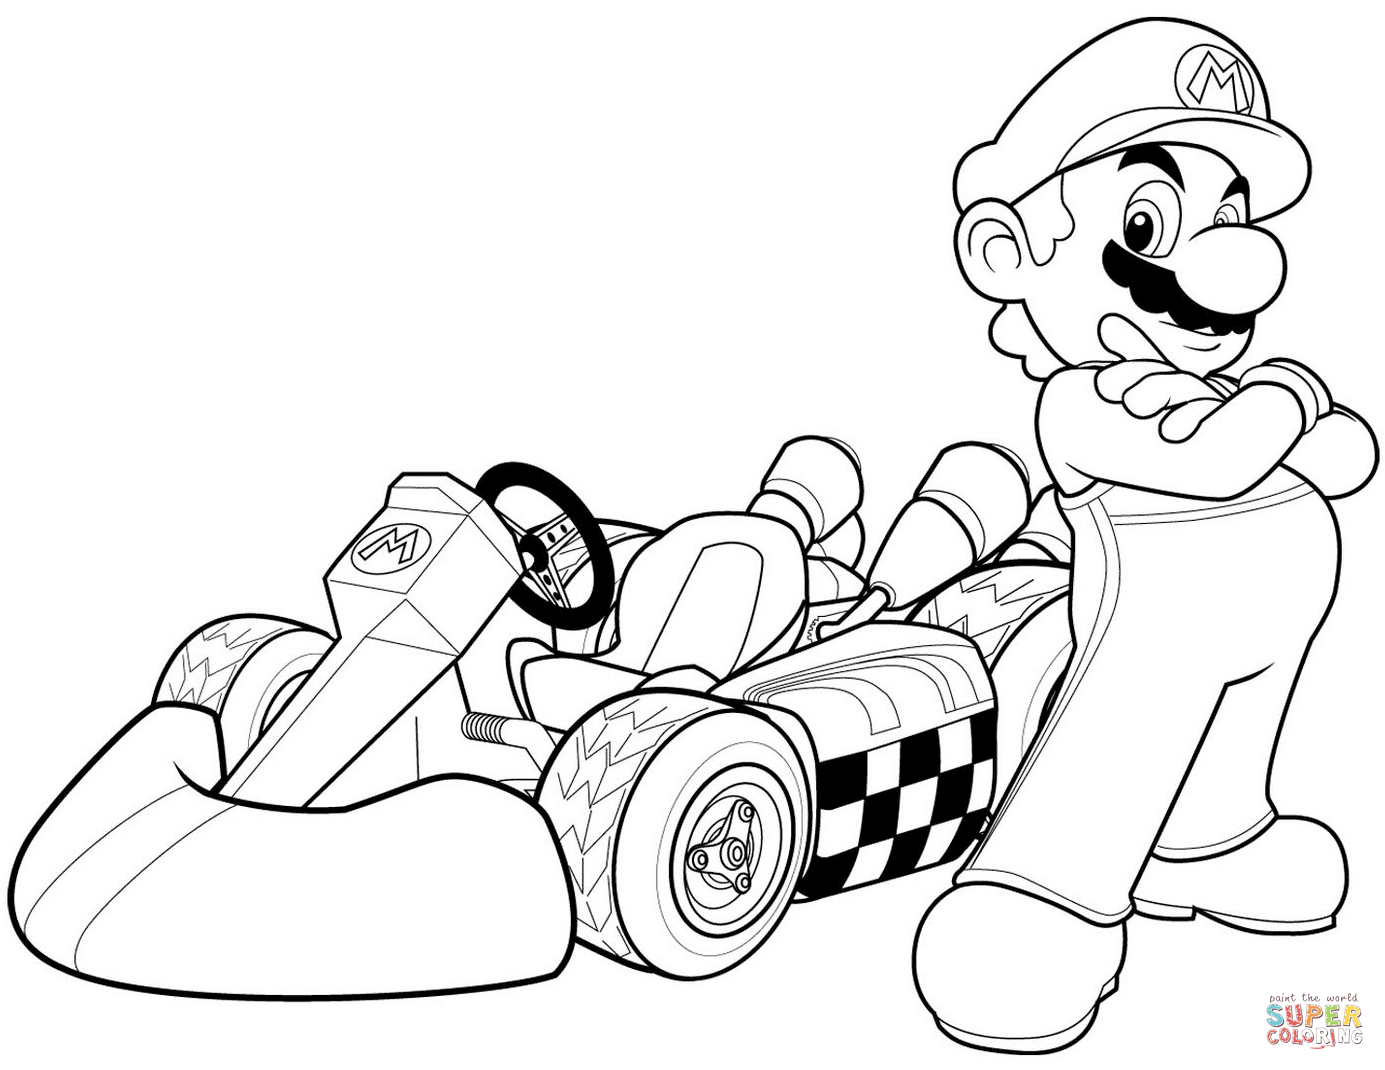 Super Mario Printable Coloring Pages | Coloring Pages